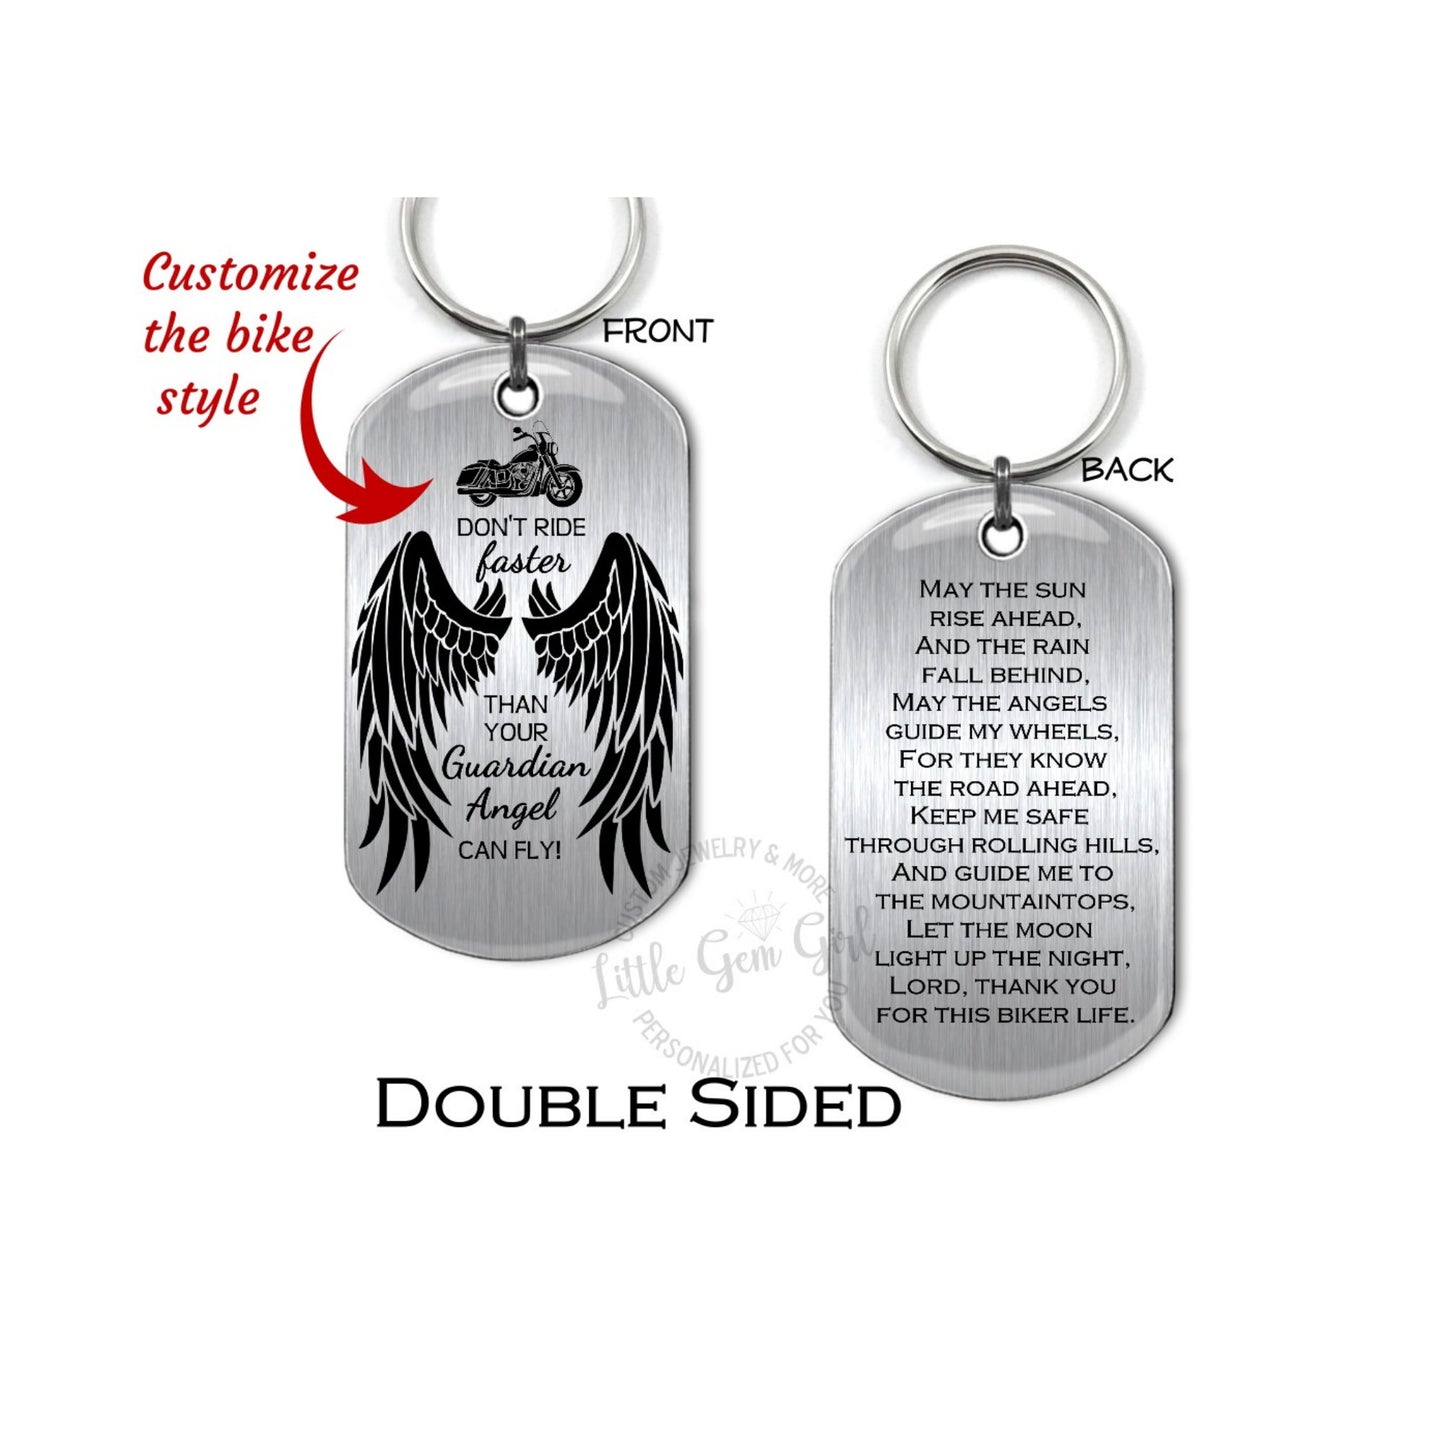 Biker Prayer for Motorcycle Riders Double Sided Dog Tag - Guardian Angel Key Chain or Necklace - Safe Driving Keepsake